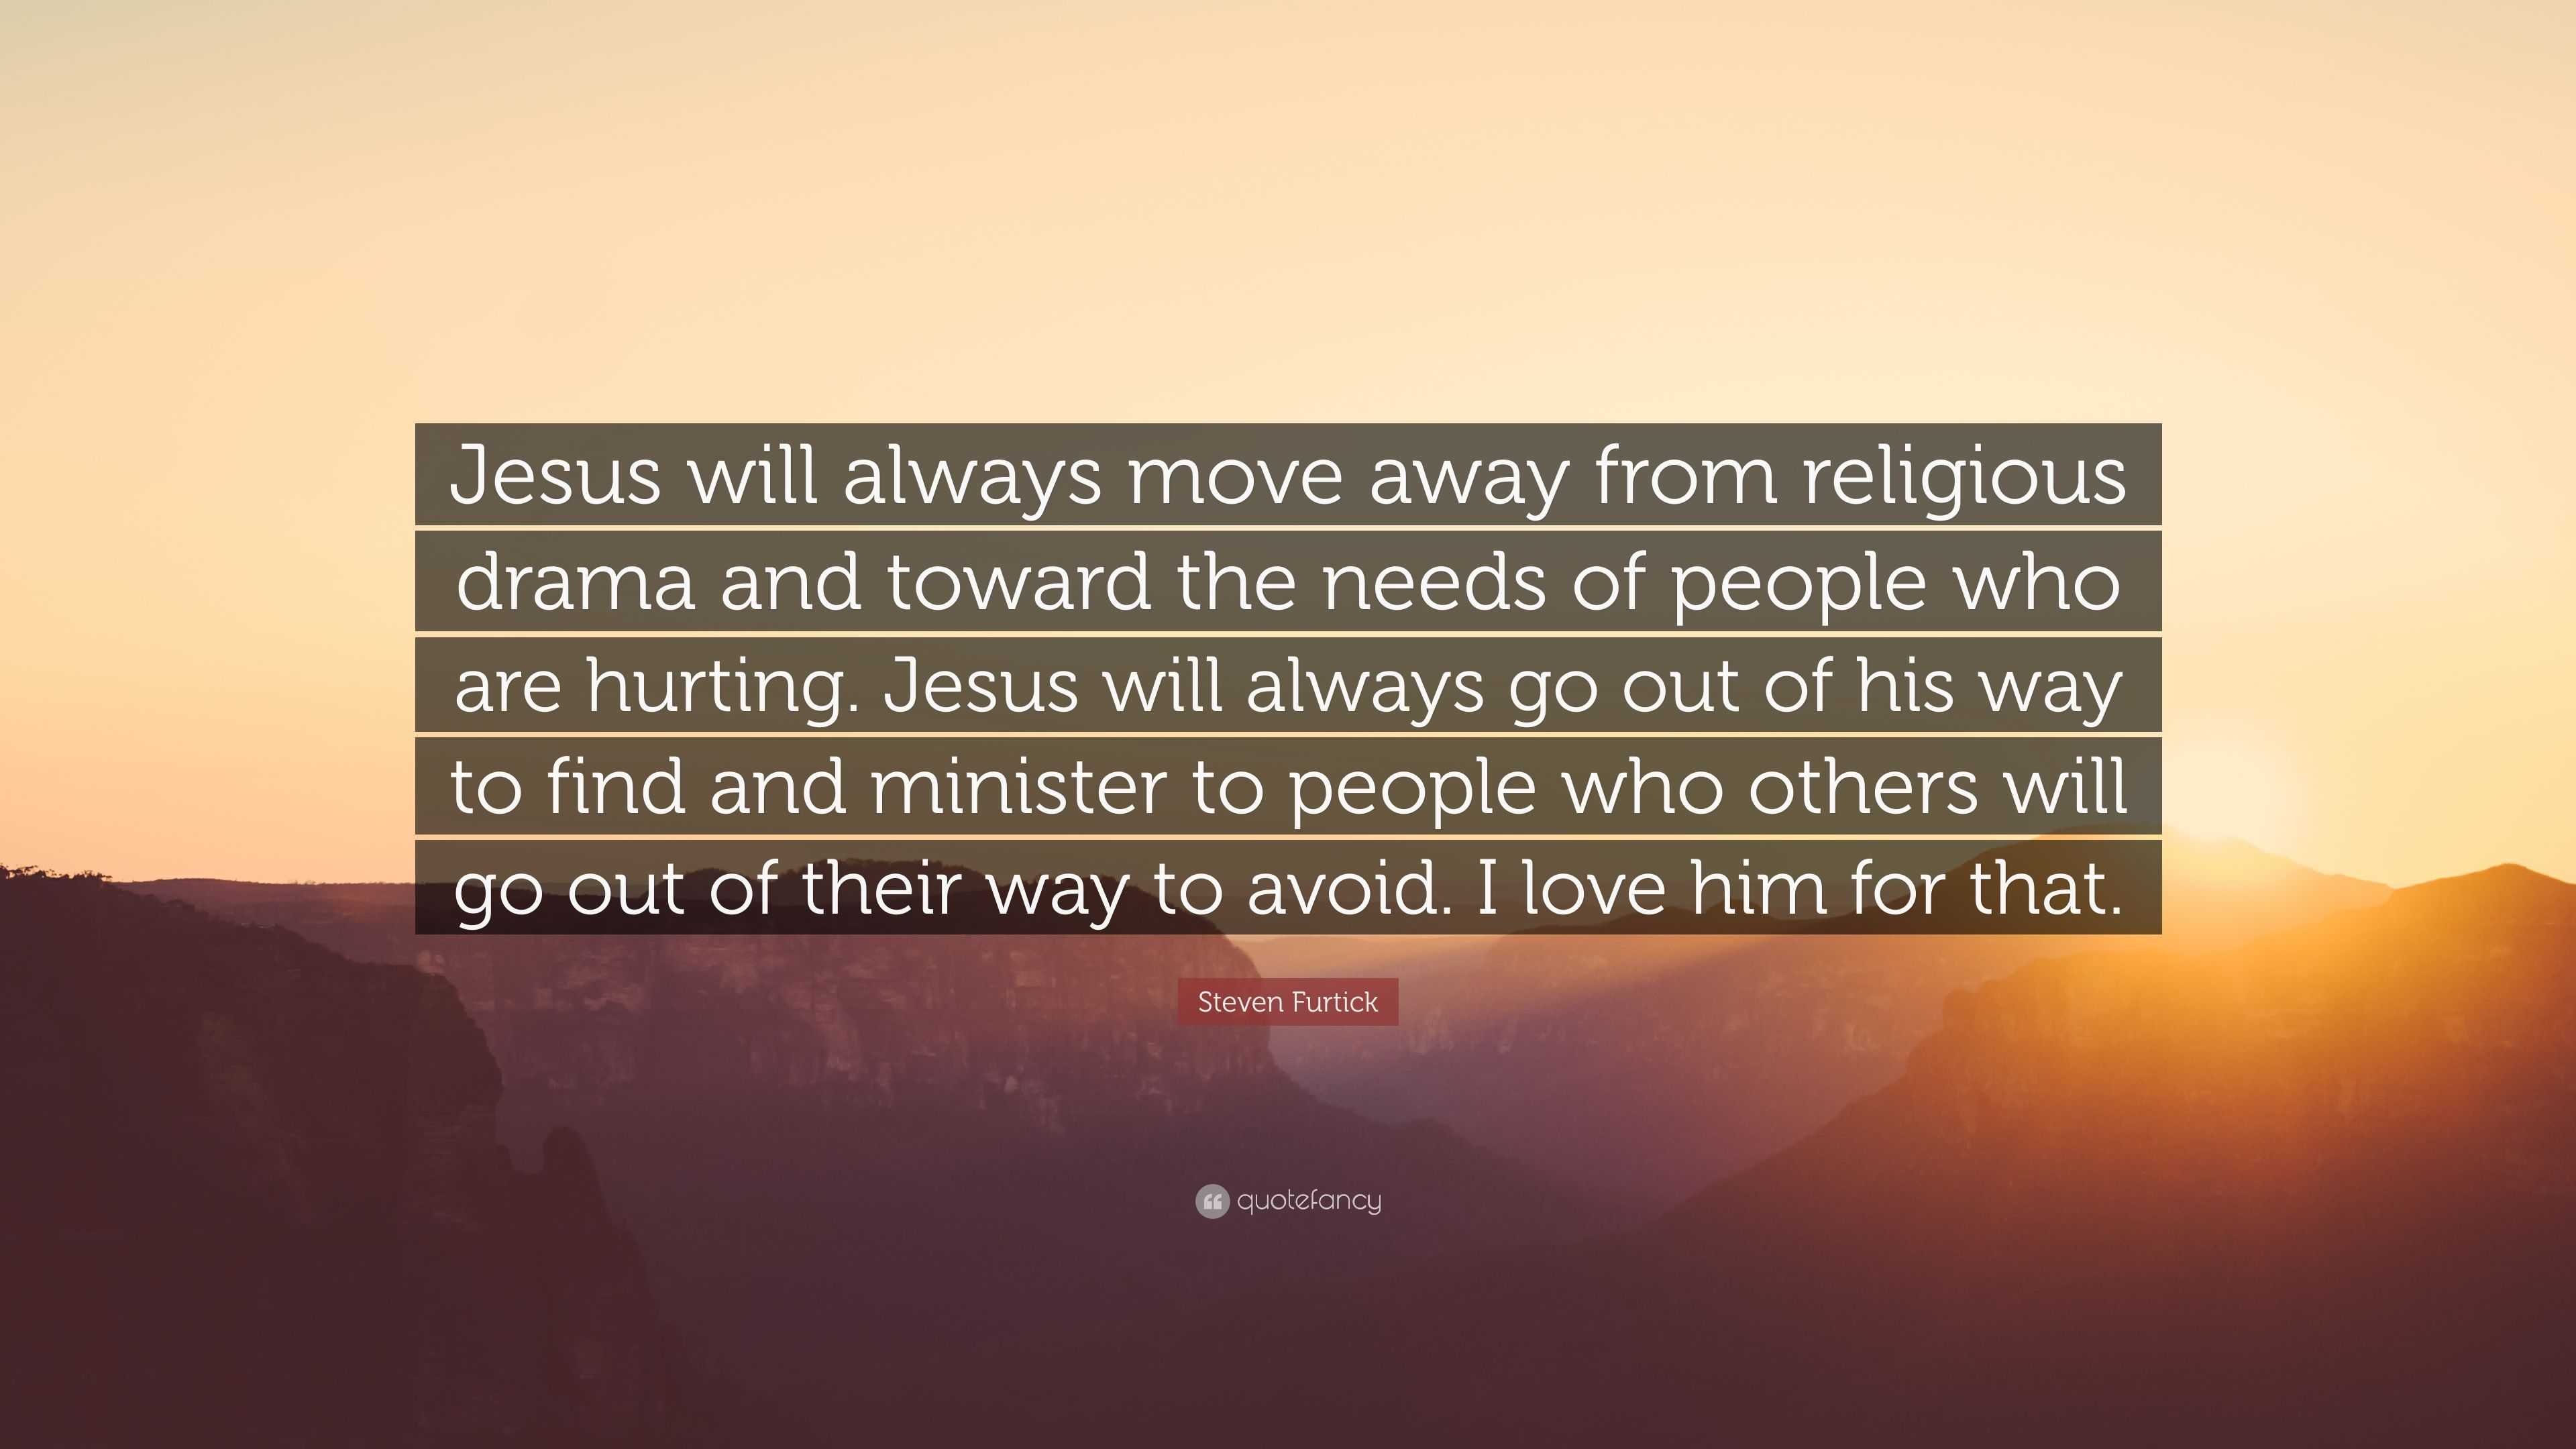 Steven Furtick Quote “Jesus will always move away from religious drama and toward the